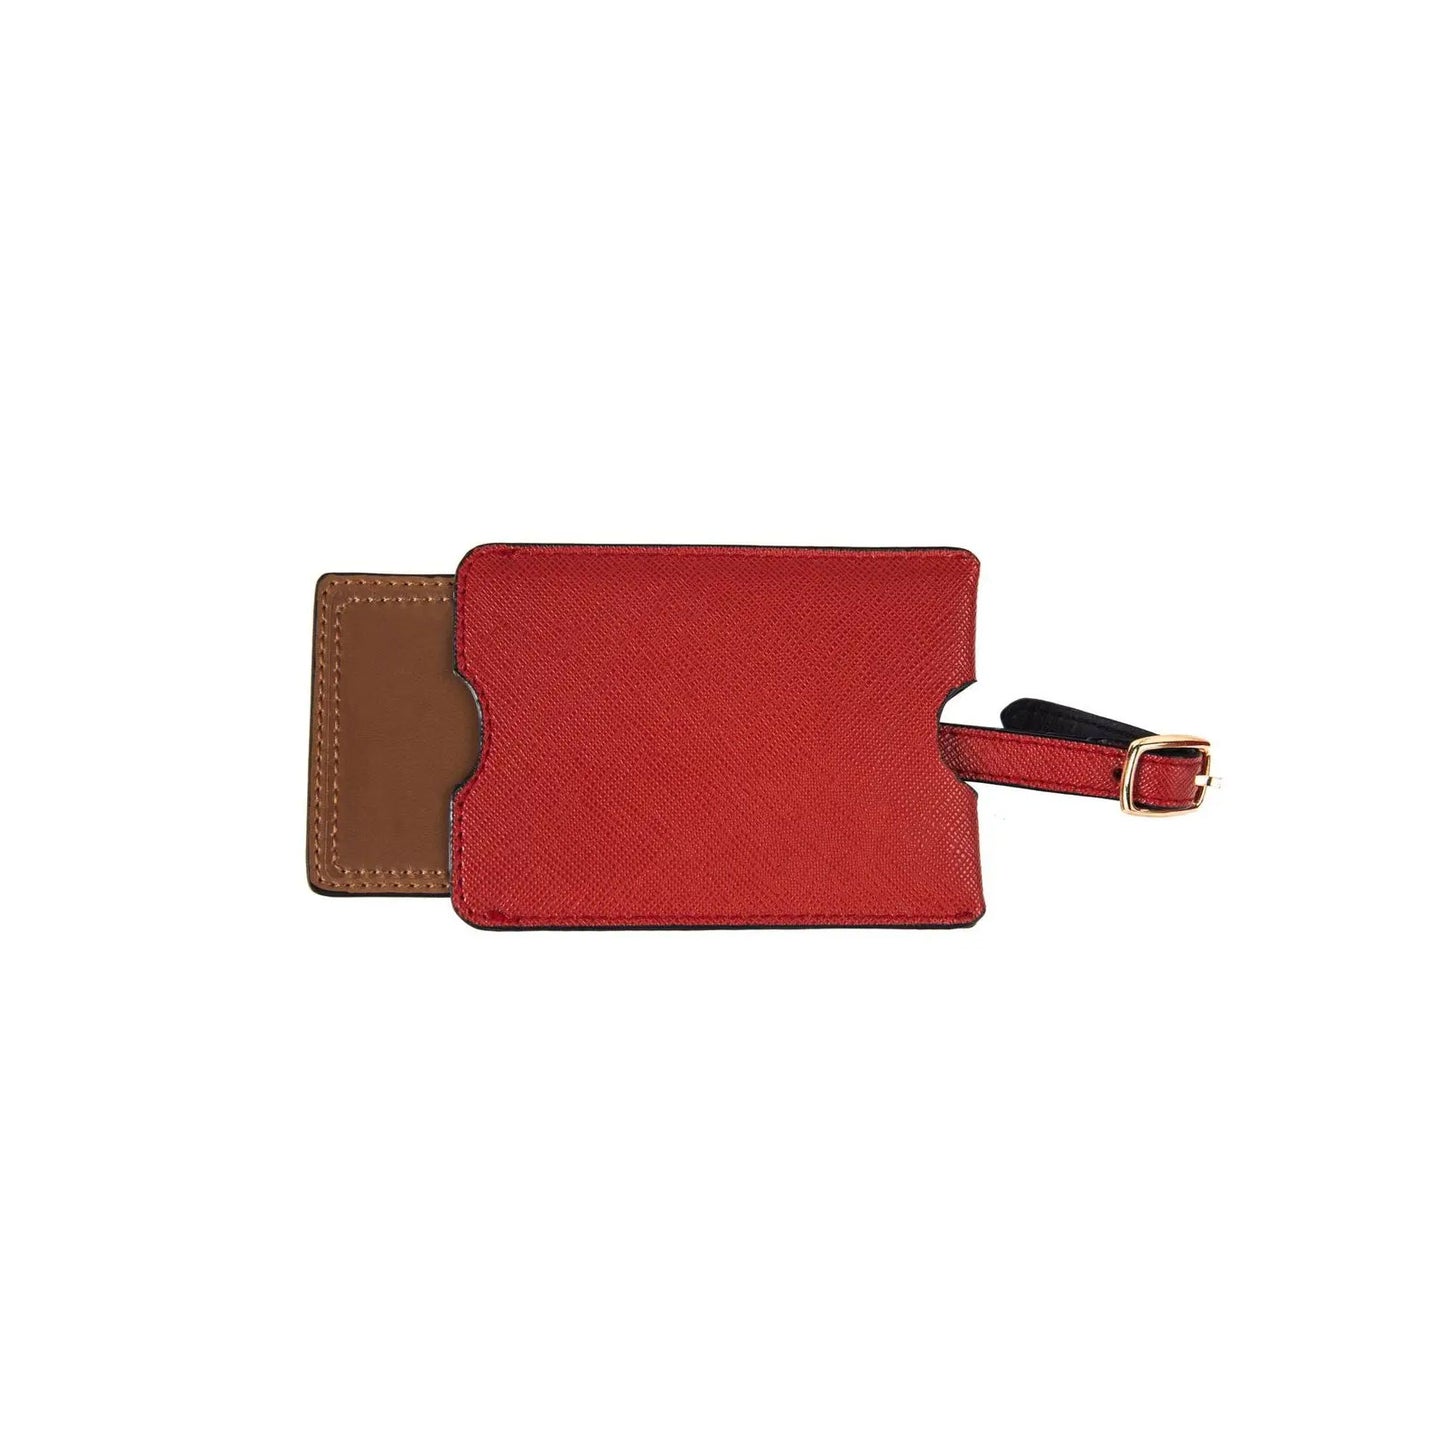 Luggage Tag in Red